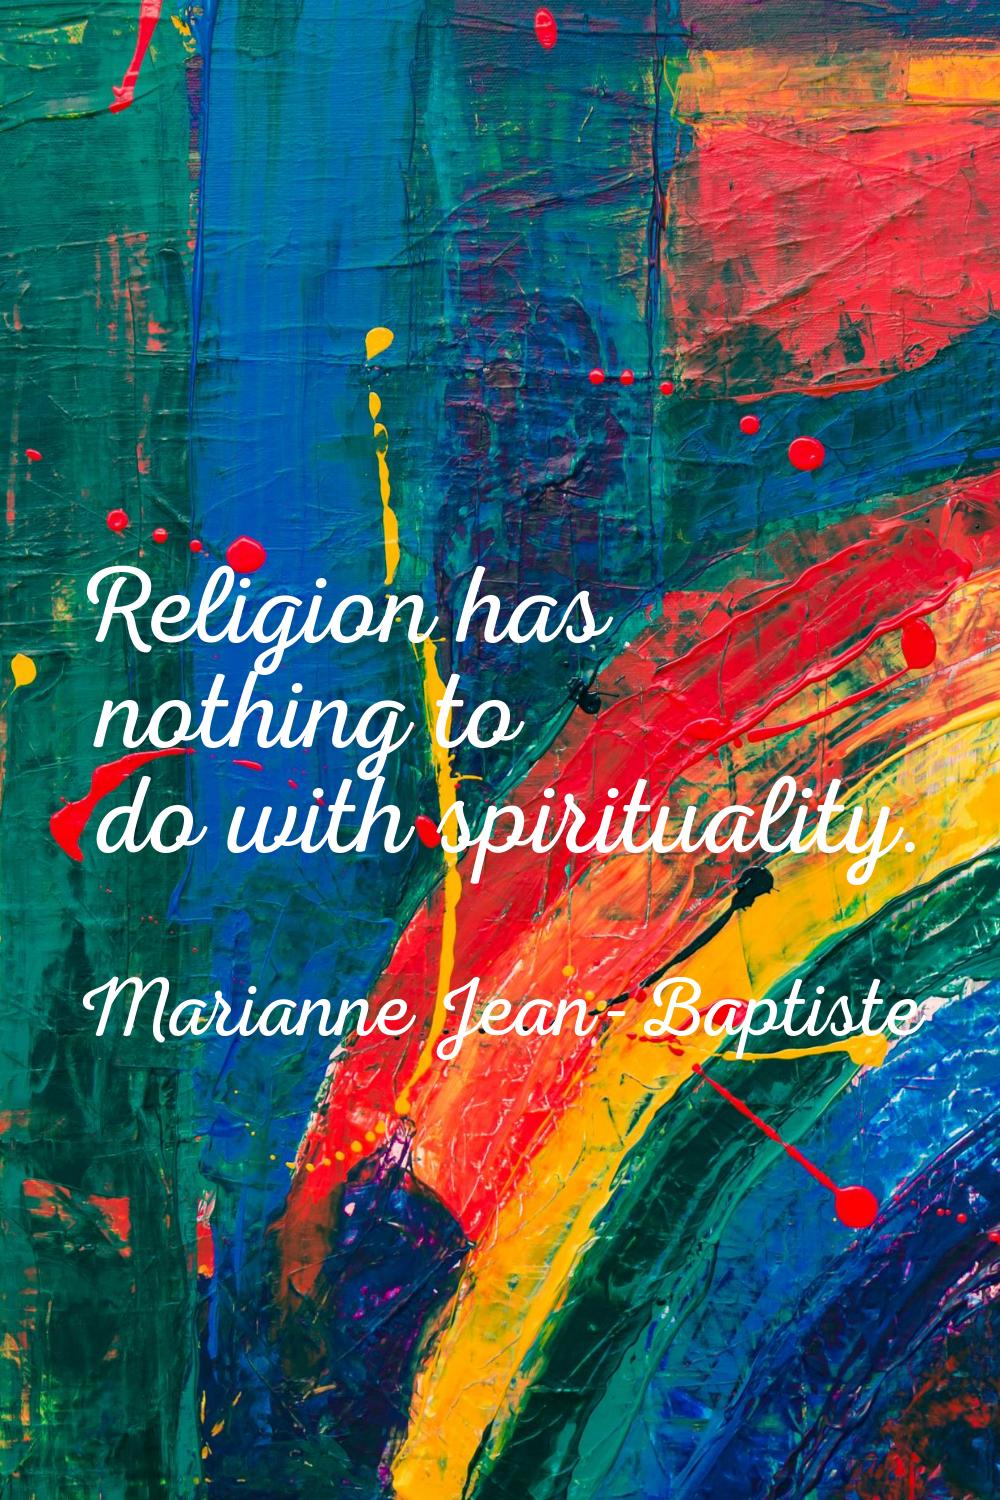 Religion has nothing to do with spirituality.